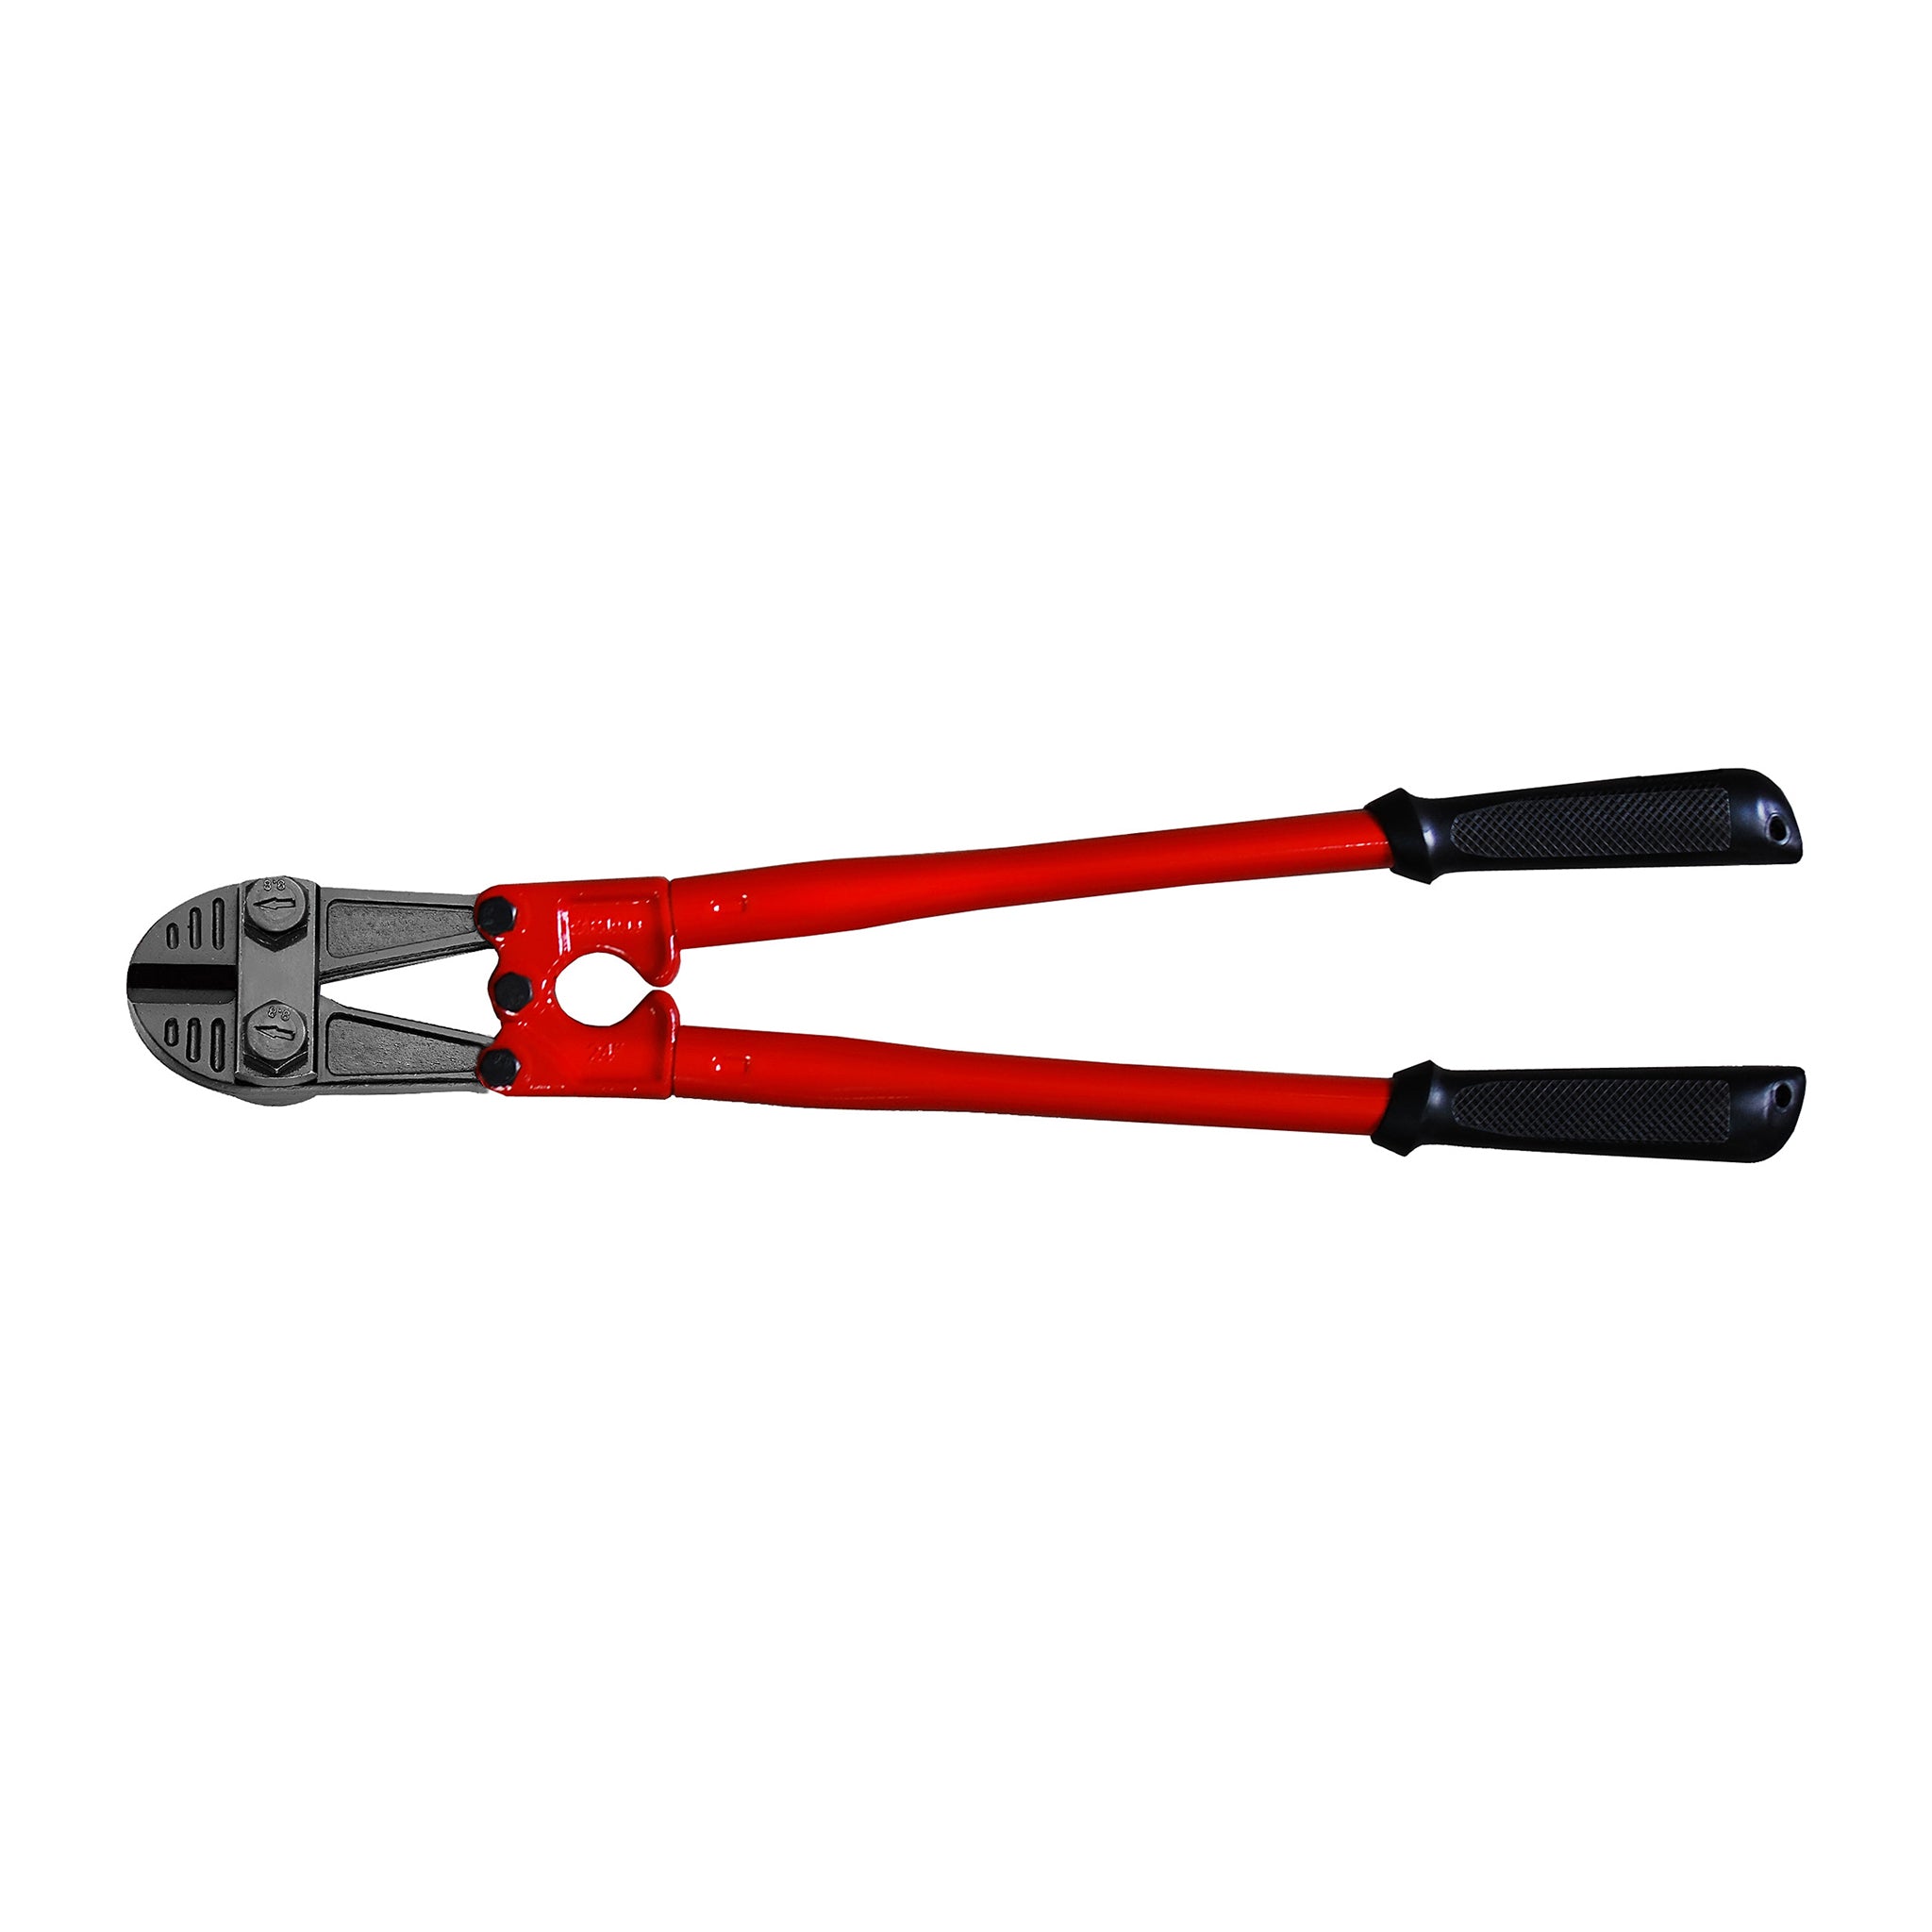 Teng Tools Bolt Cutters With Dipped Handle 8 To 36 Inches - 30 Inch